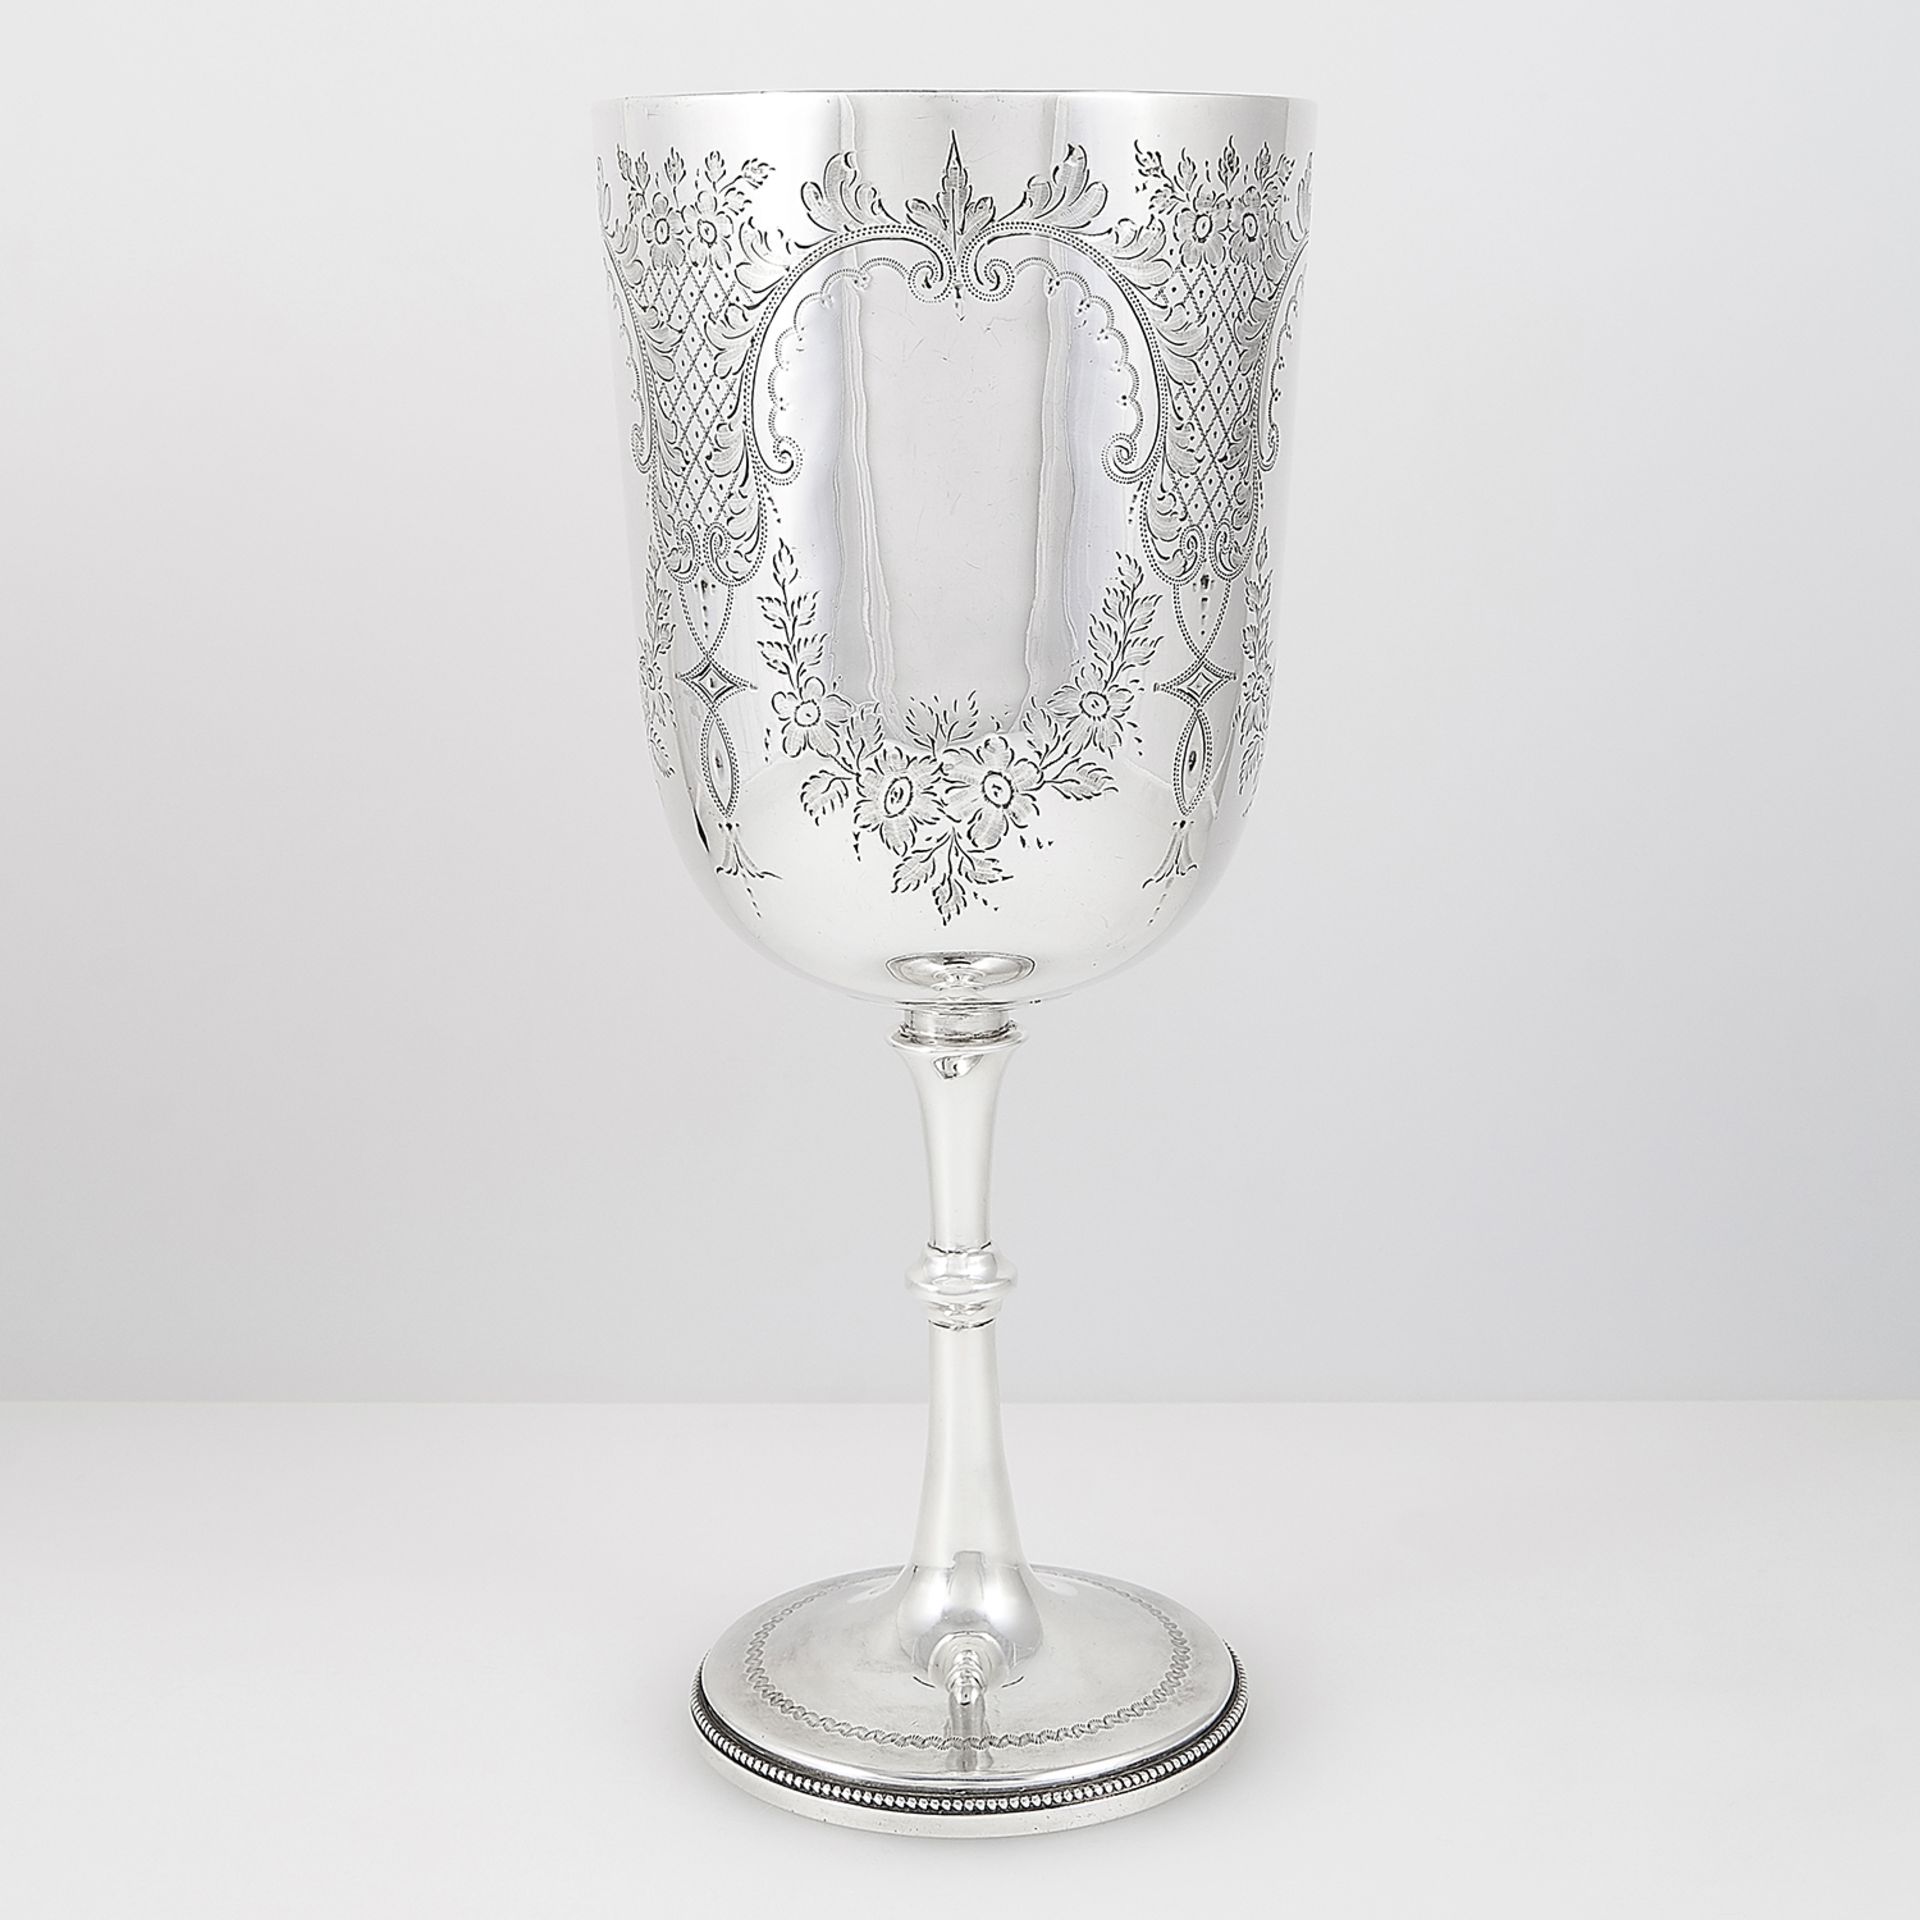 ANTIQUE VICTORIAN STERLING SILVER GOBLET, JACKSON FULLERTON, LONDON 1900 the rounded body with